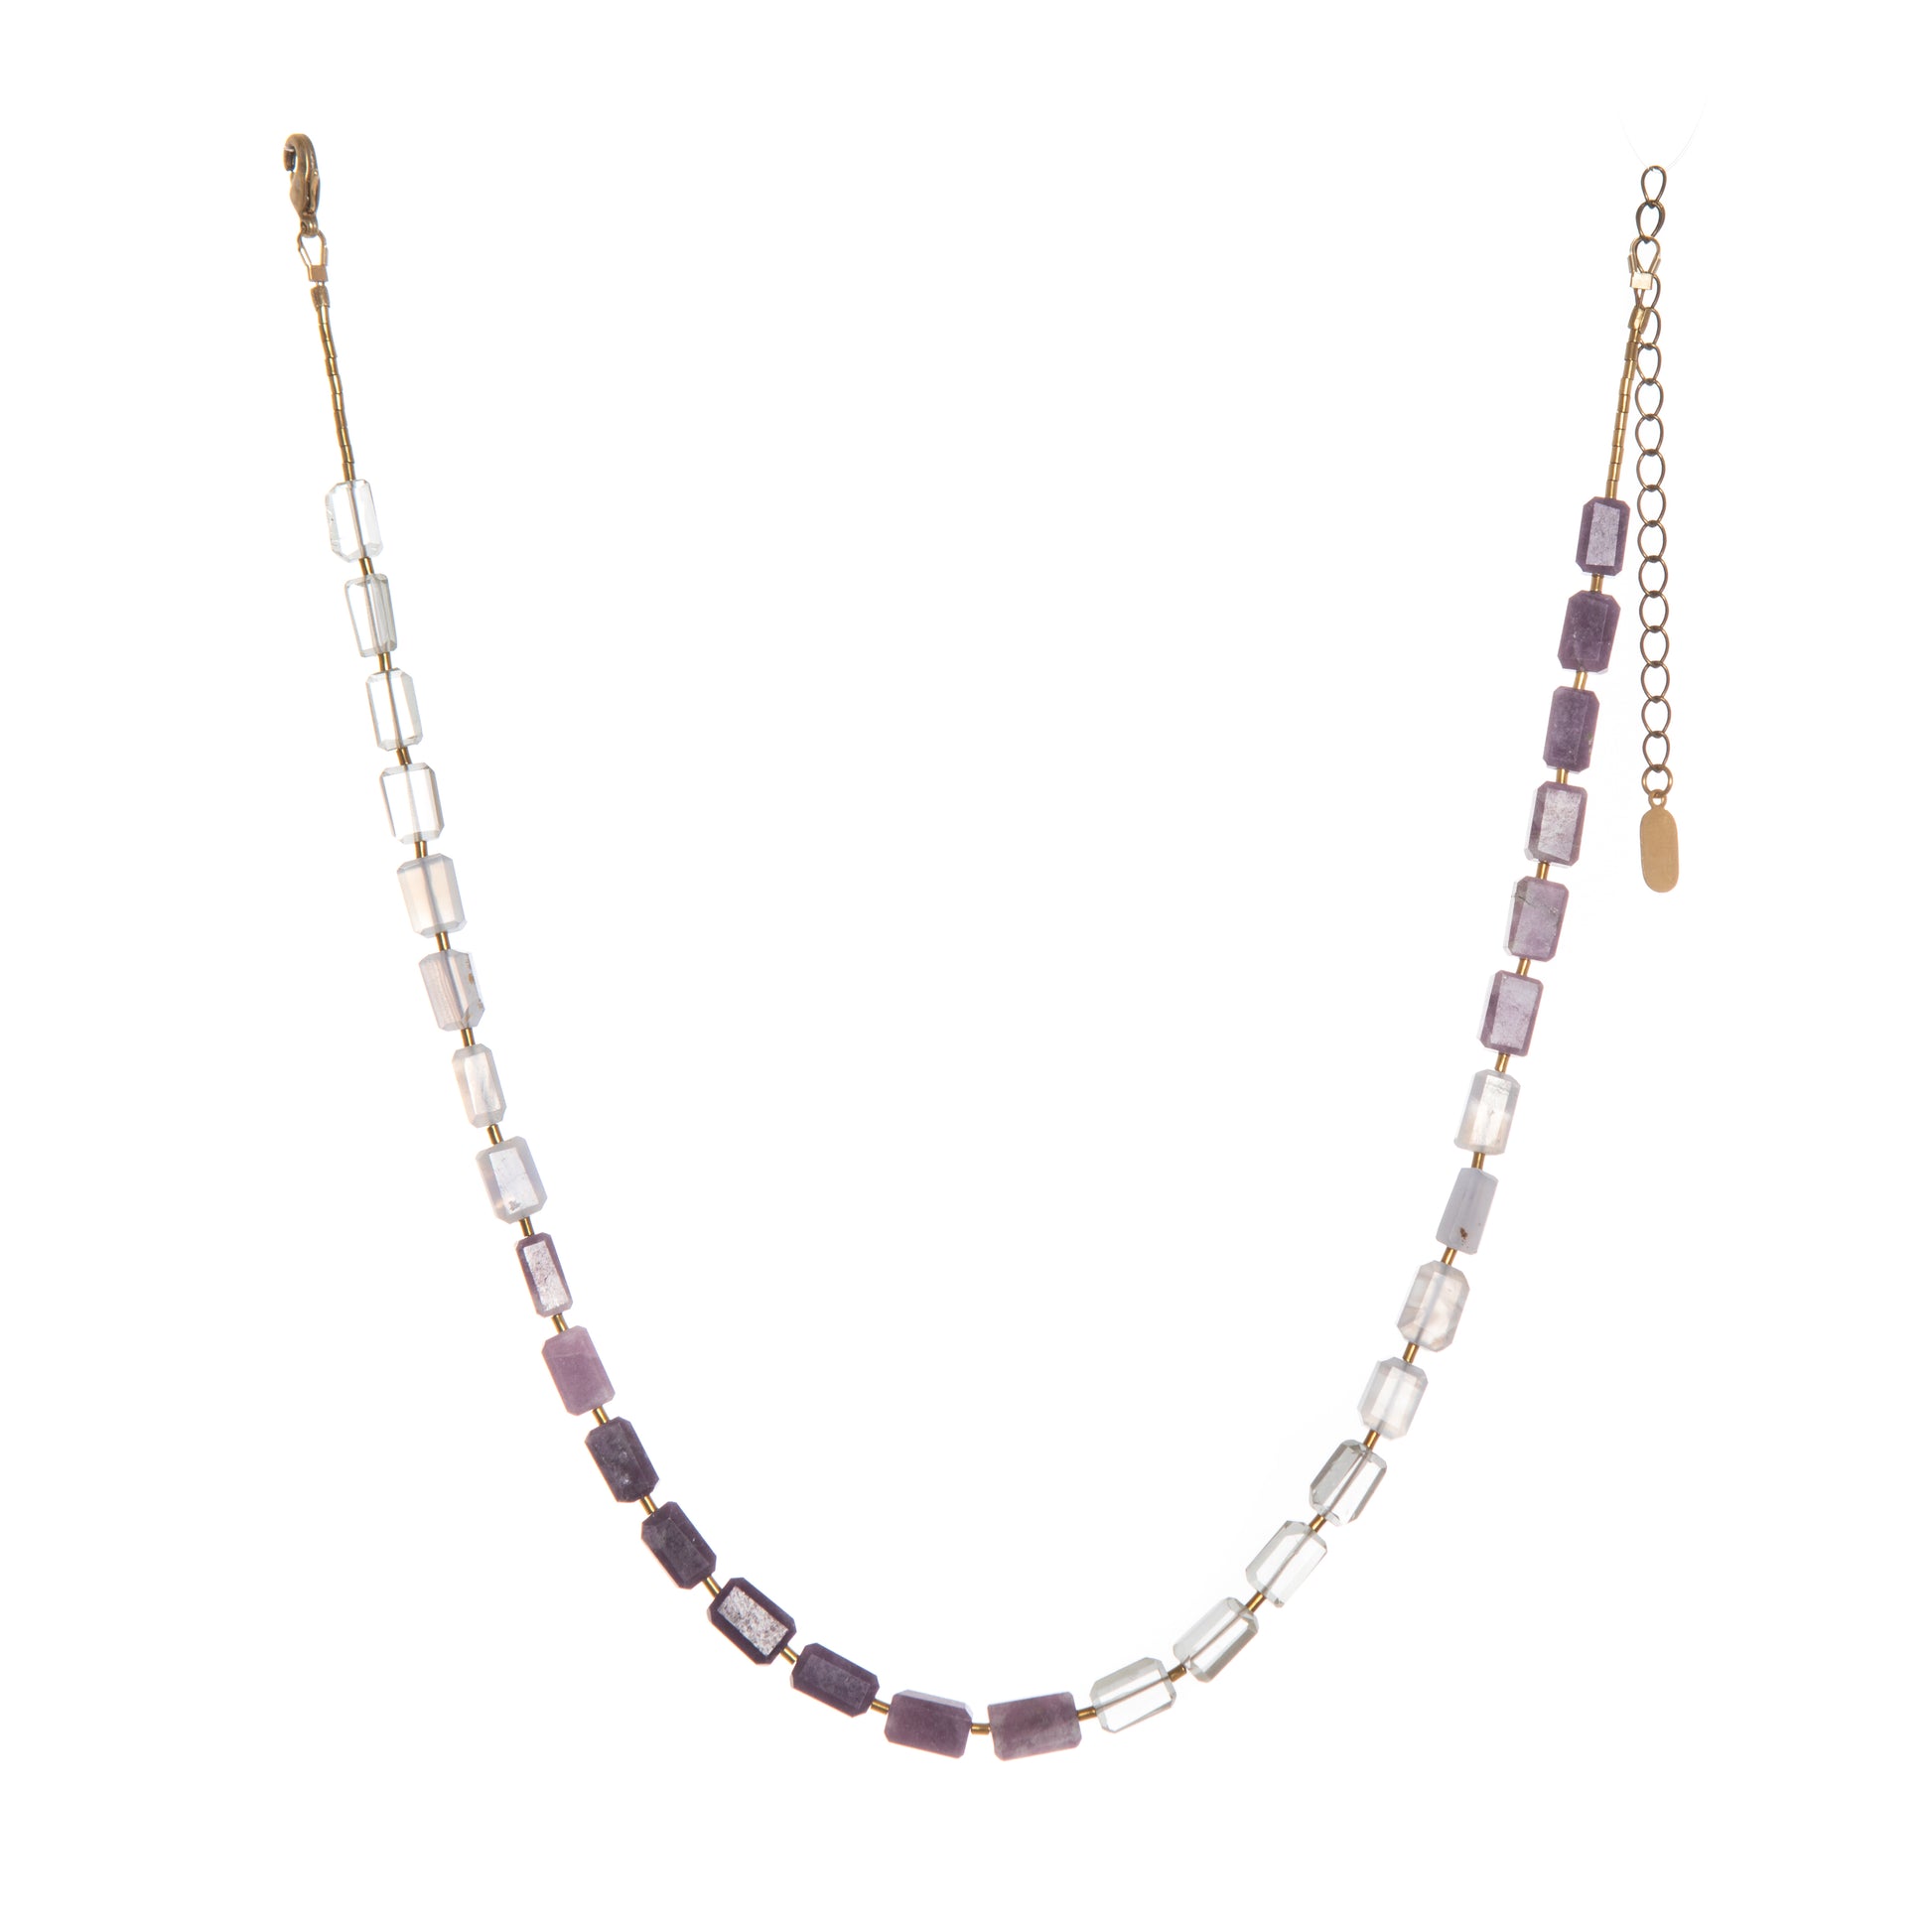 Lepidolite, Blue Lace Agate + Green Amethyst Gemstone Ombre Necklace